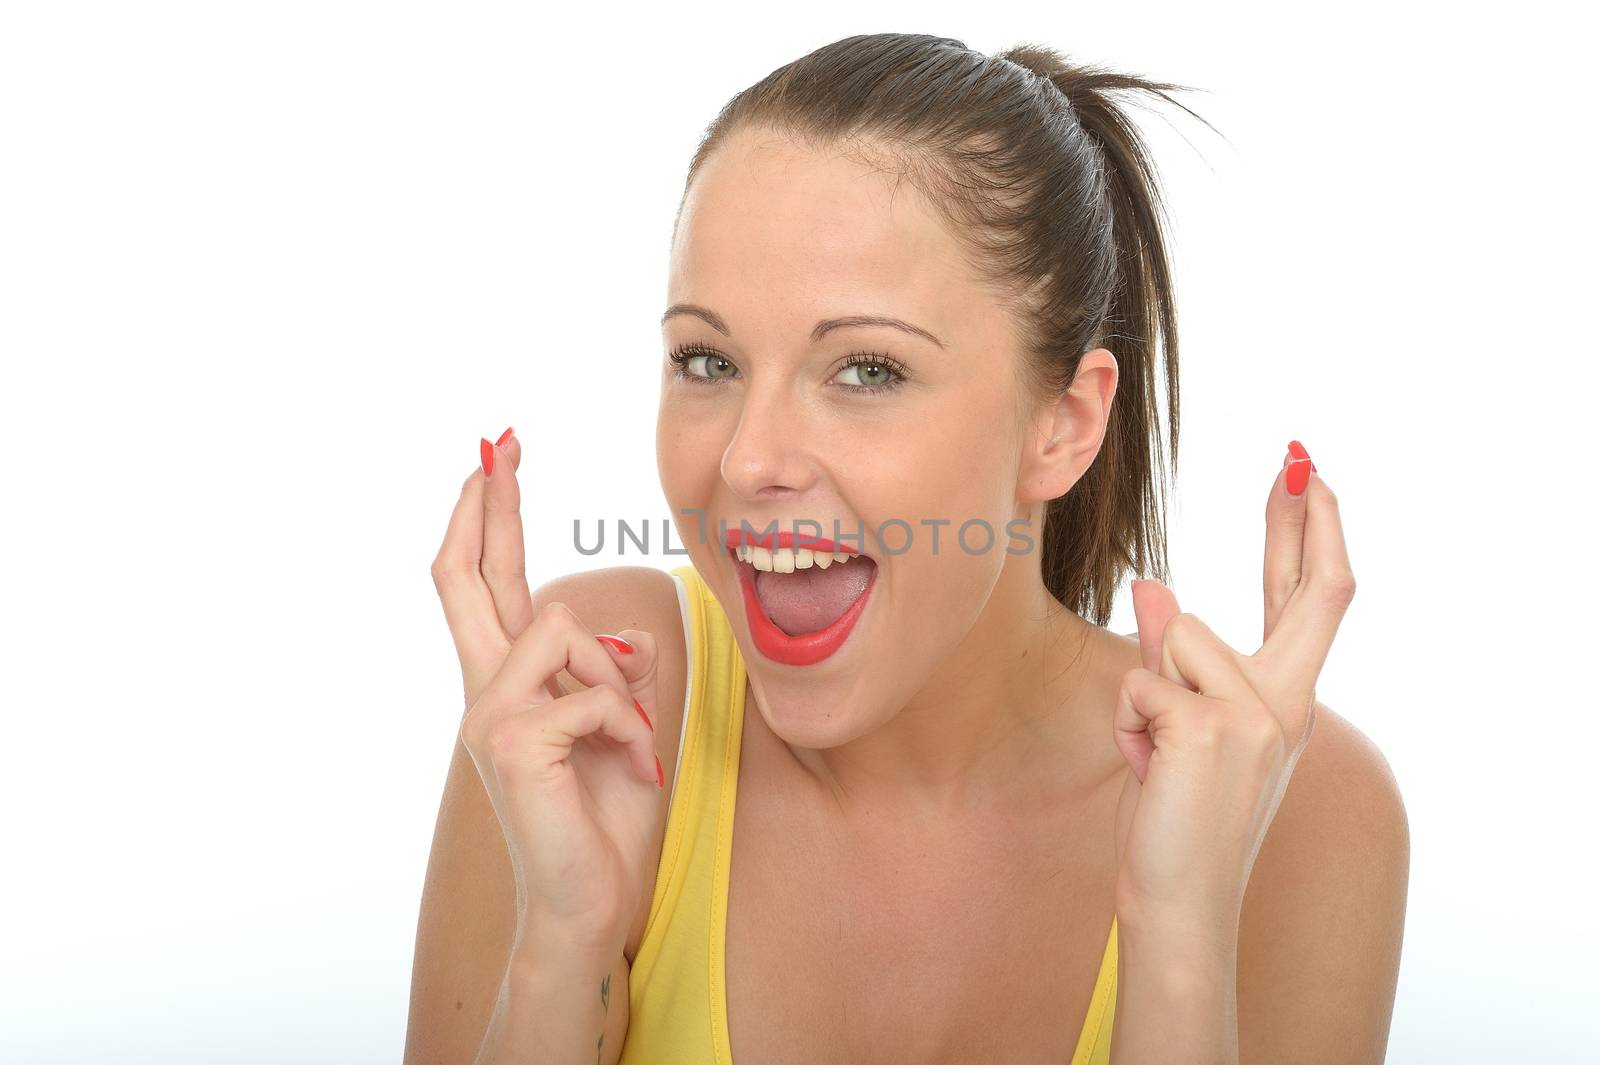 Portrait of a Happy Young Woman With Her Fingers Crossed by Whiteboxmedia